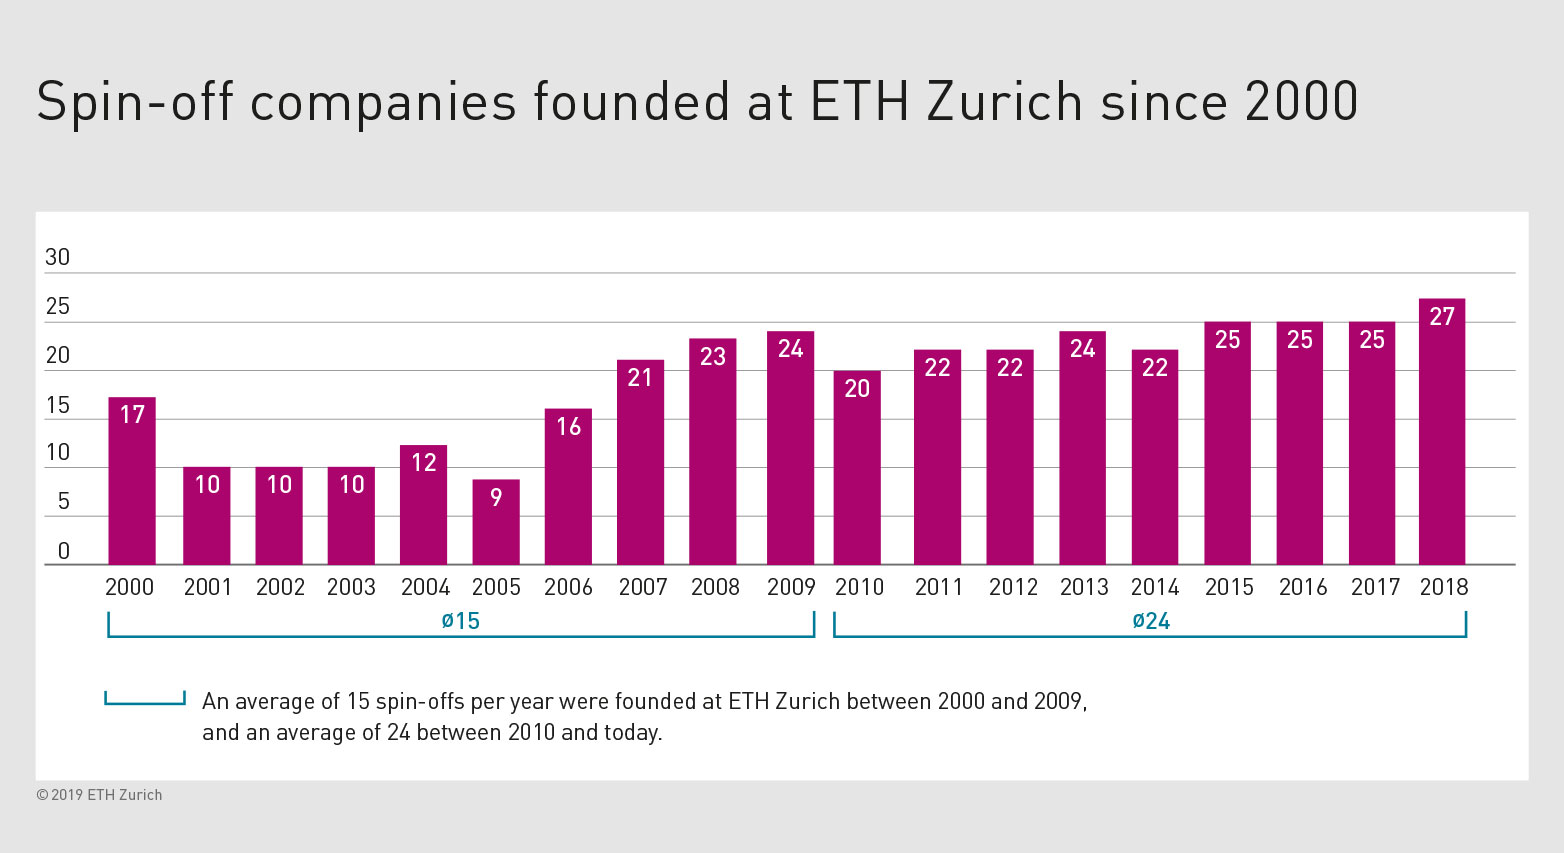 Enlarged view: Since 2000, 364 spin-offs have been founded at ETH Zurich. (Graphic: ETH Zurich)